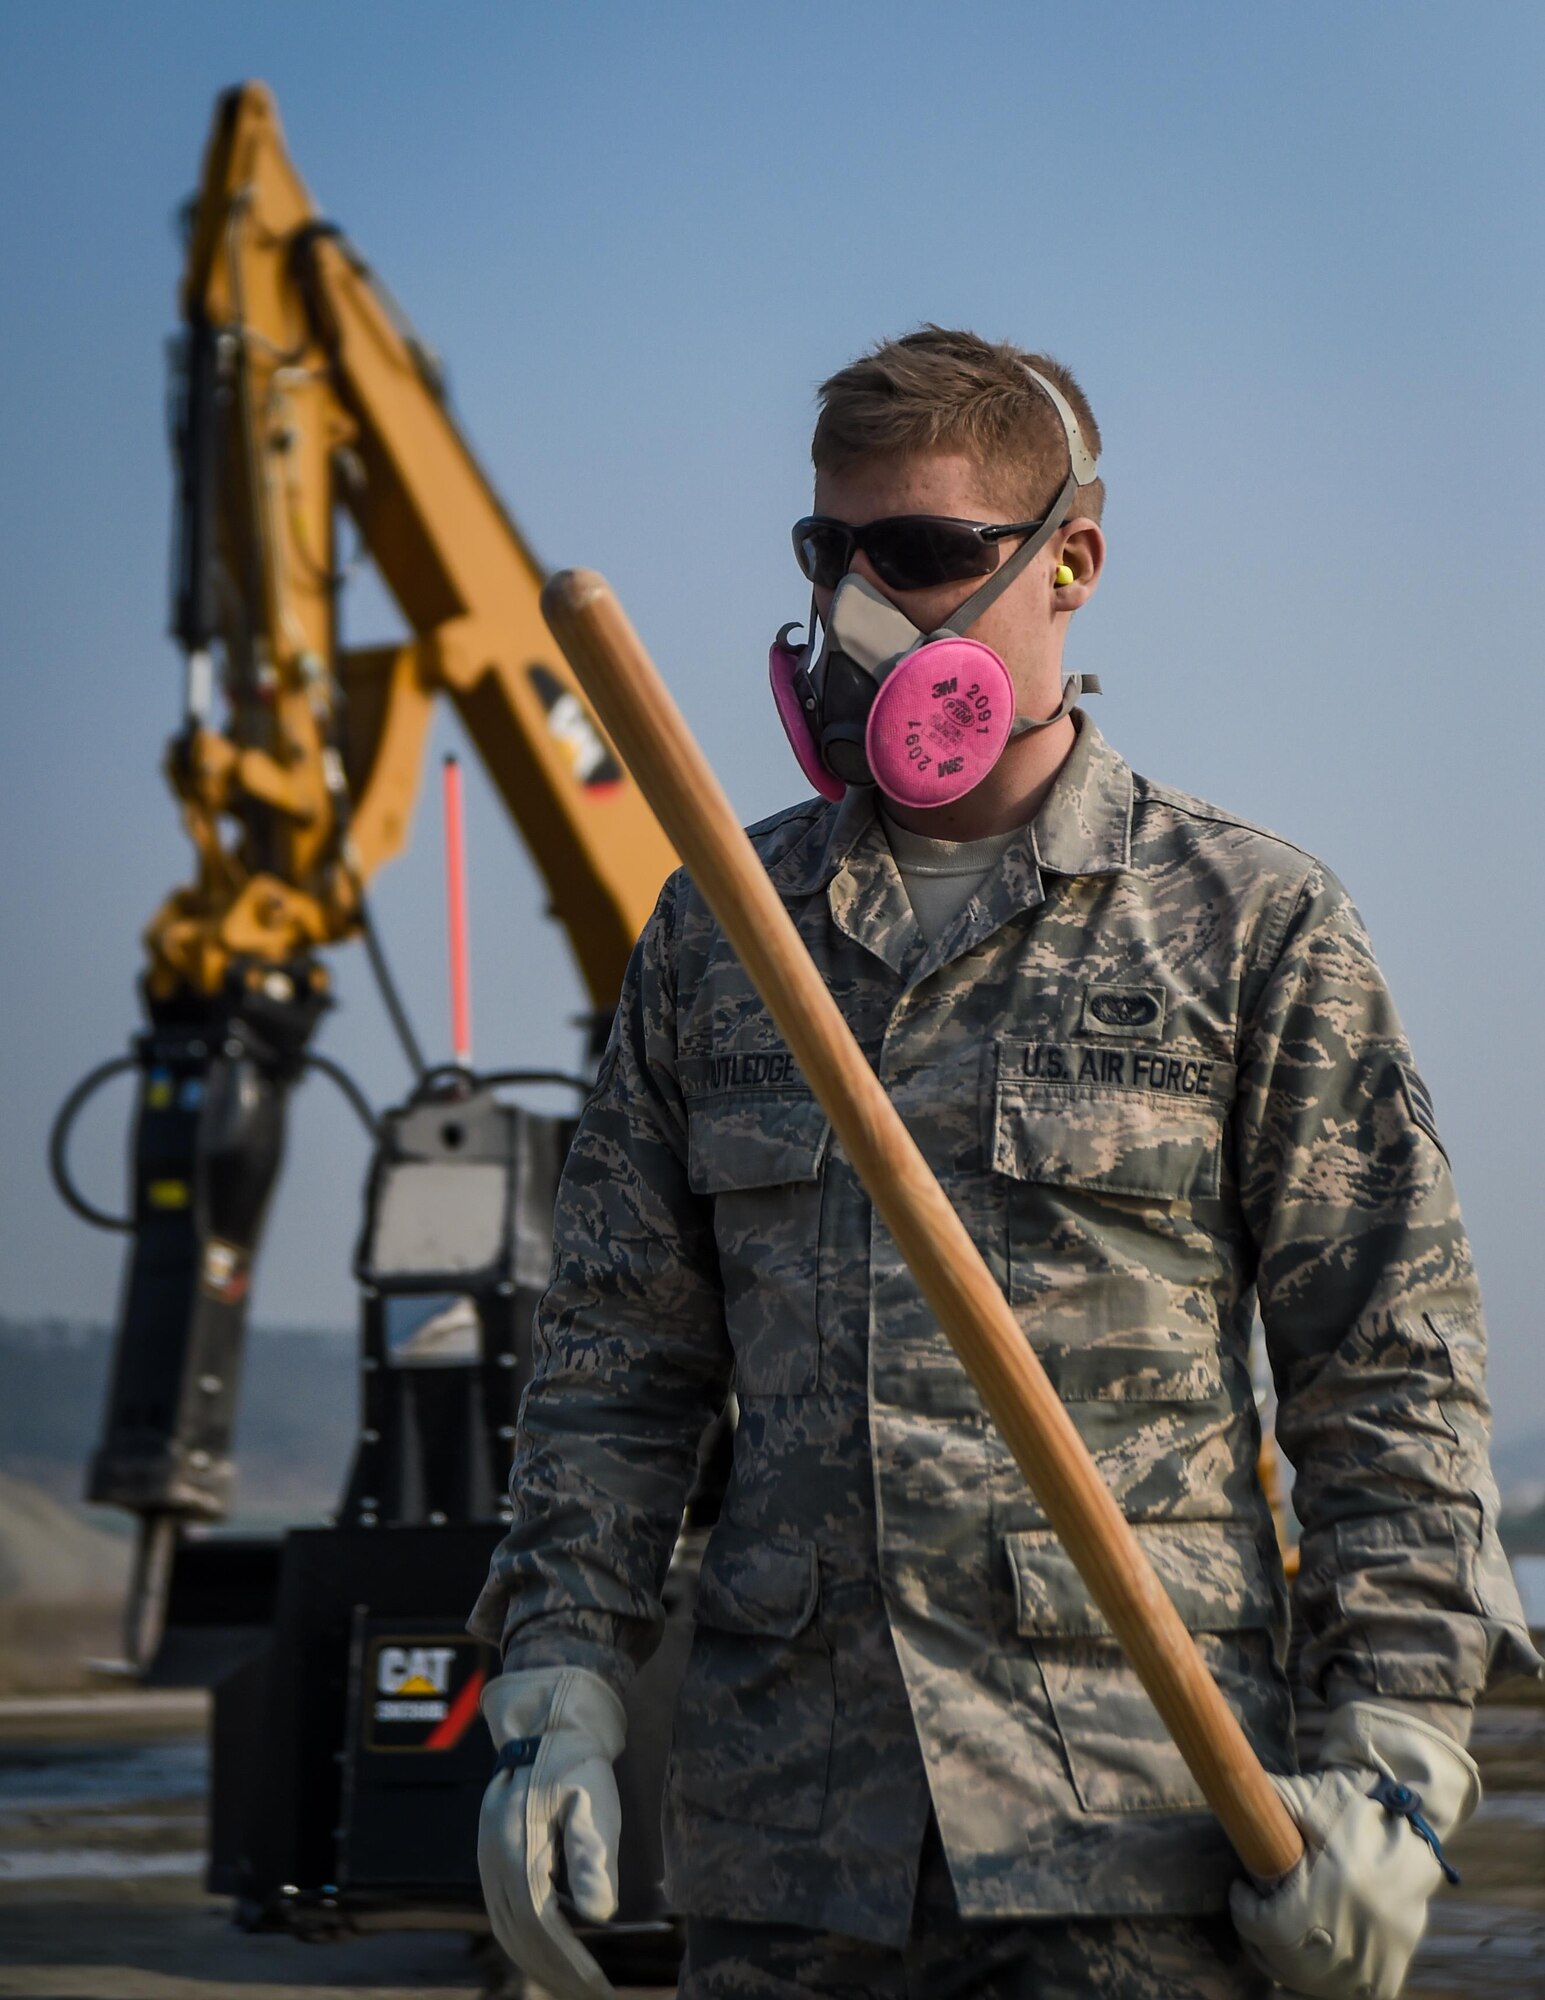 U.S. Air Force Senior Airman Tyler Rutledge, 773d Civil Engineer Squadron, participates in a Rapid Airfield Damage Repair training exercise at Gwangju Air Base, Republic of Korea, Nov. 8, 2017. Approximately forty U.S. Airmen from the 773d CES at Joint Base Elmendorf-Richardson, Alaska, and 40 R.O.K. Airmen from Gwangju trained together for a week to learn a new runway repair process for wartime contingencies. The bilateral training exercise enhanced interoperability and built partnership capacity in the Indo-Asia Pacific region. (U.S. Air Force photo by Senior Airman Curt Beach)